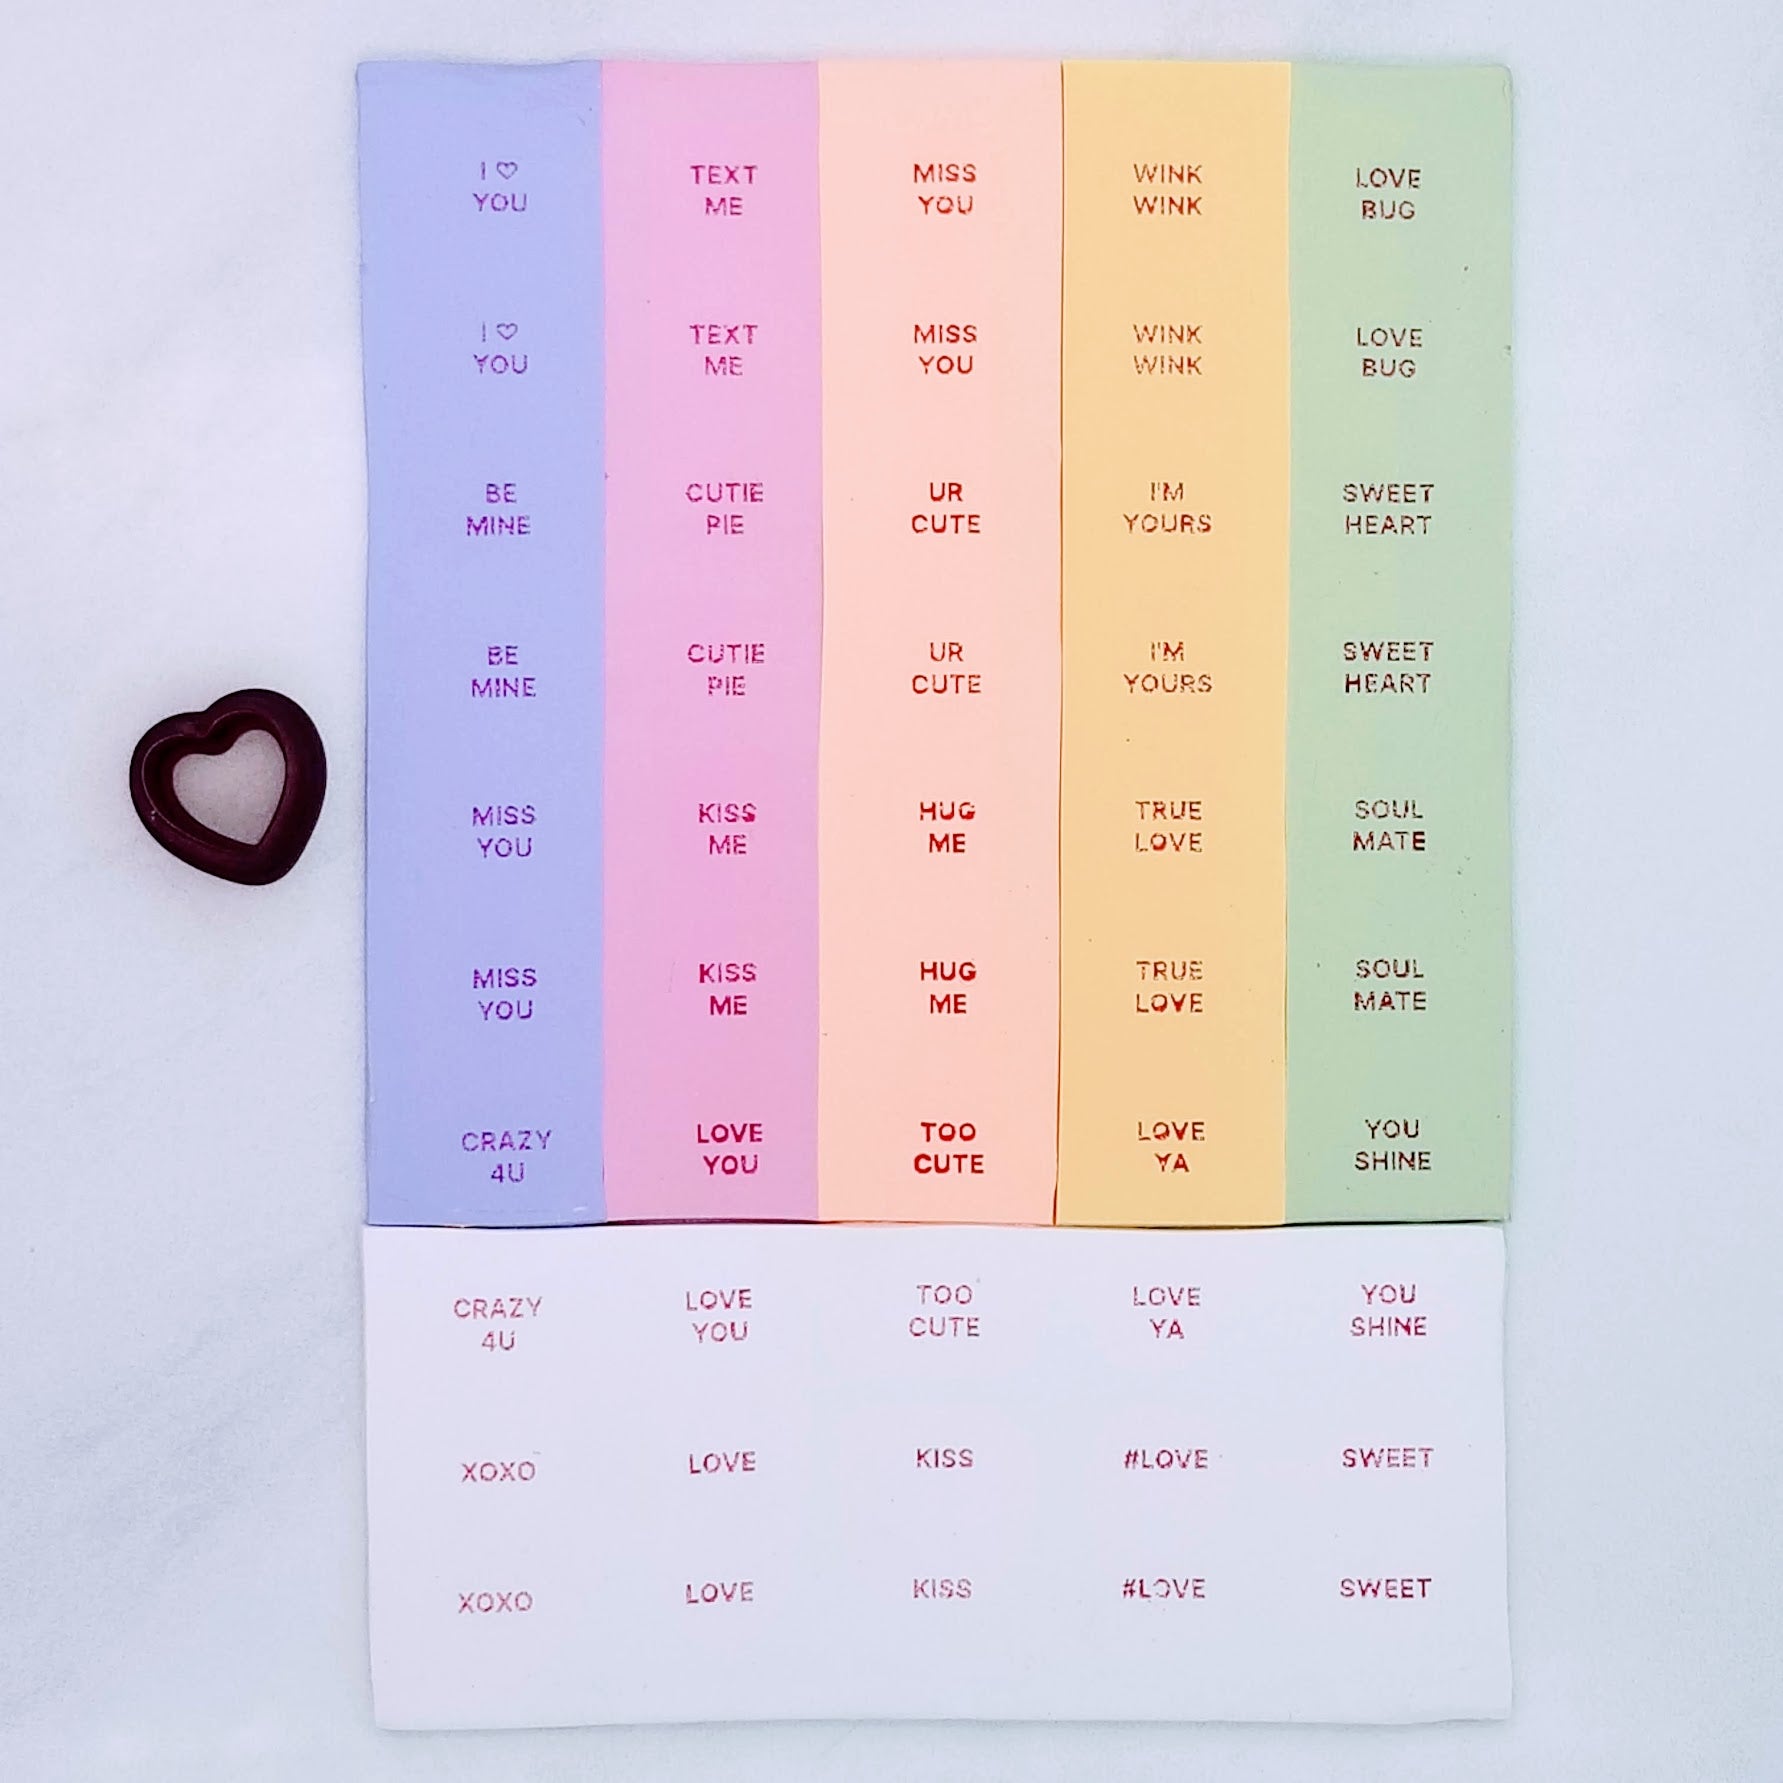 silk screen with 24 different sweet phrases commonly seen on Valentine's day candy on polymer clay